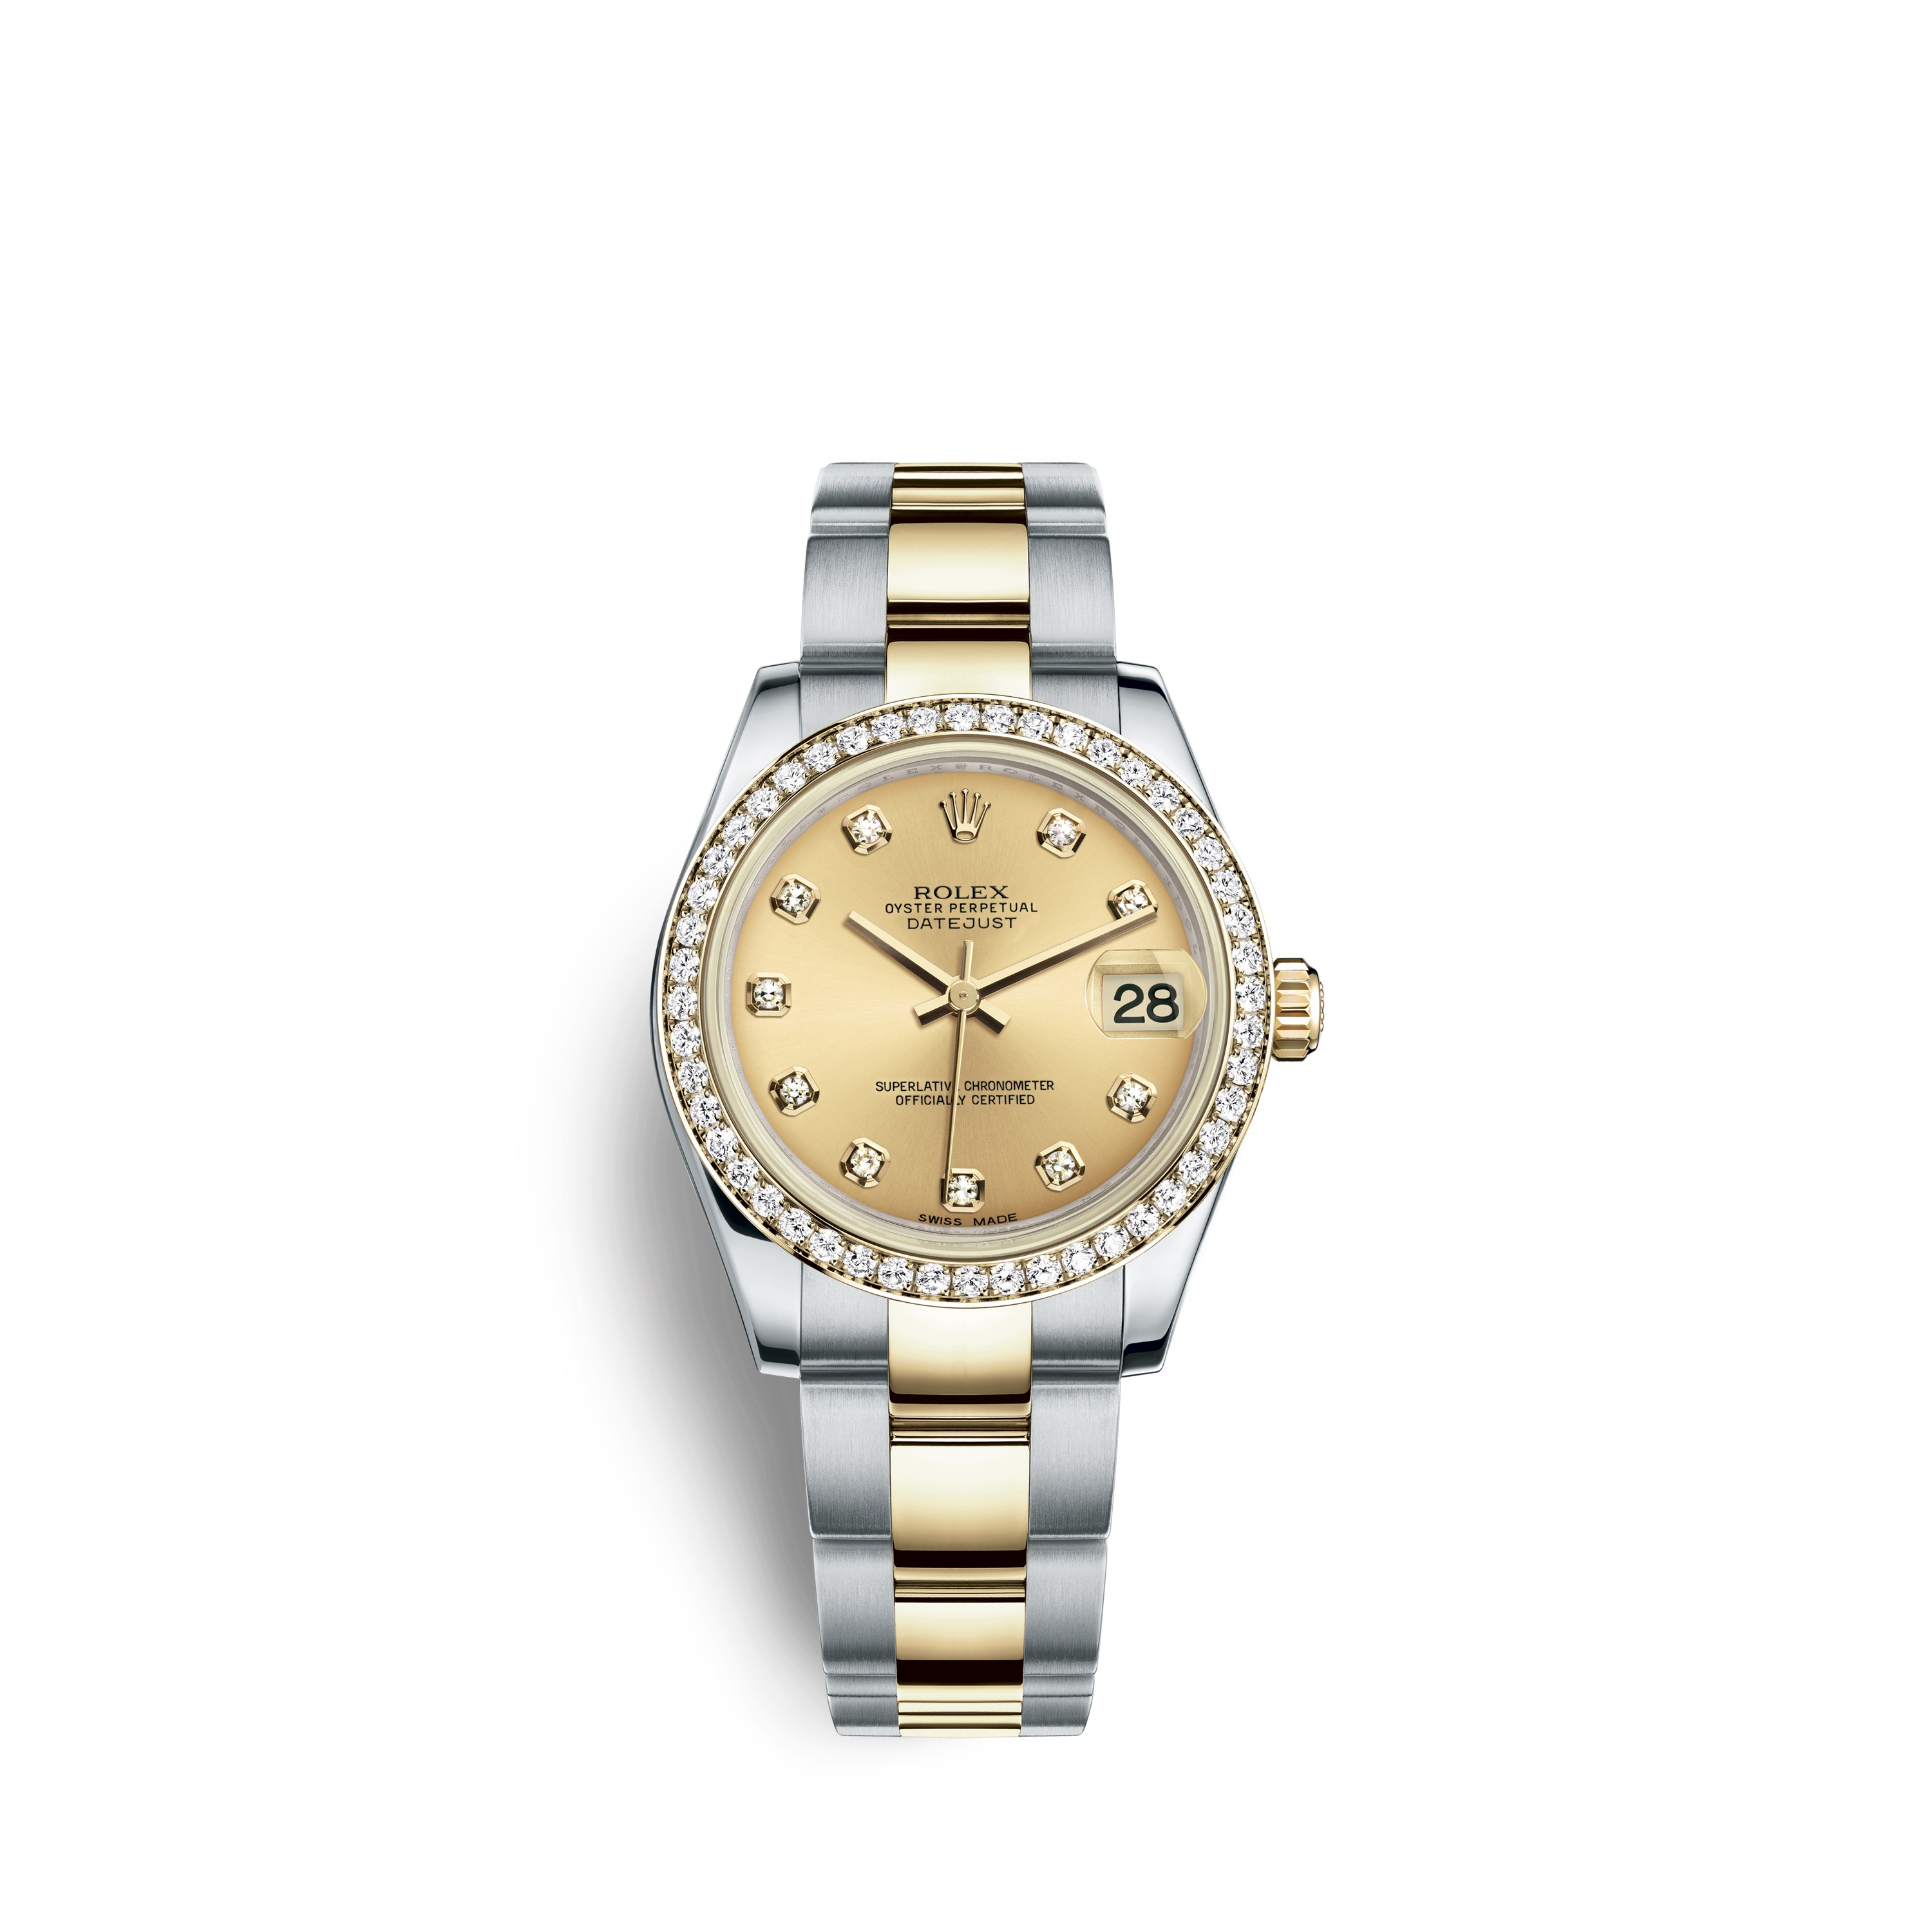 Datejust 31 178383 Gold and Stainless Steel Watch (Champagne Set with Diamonds)